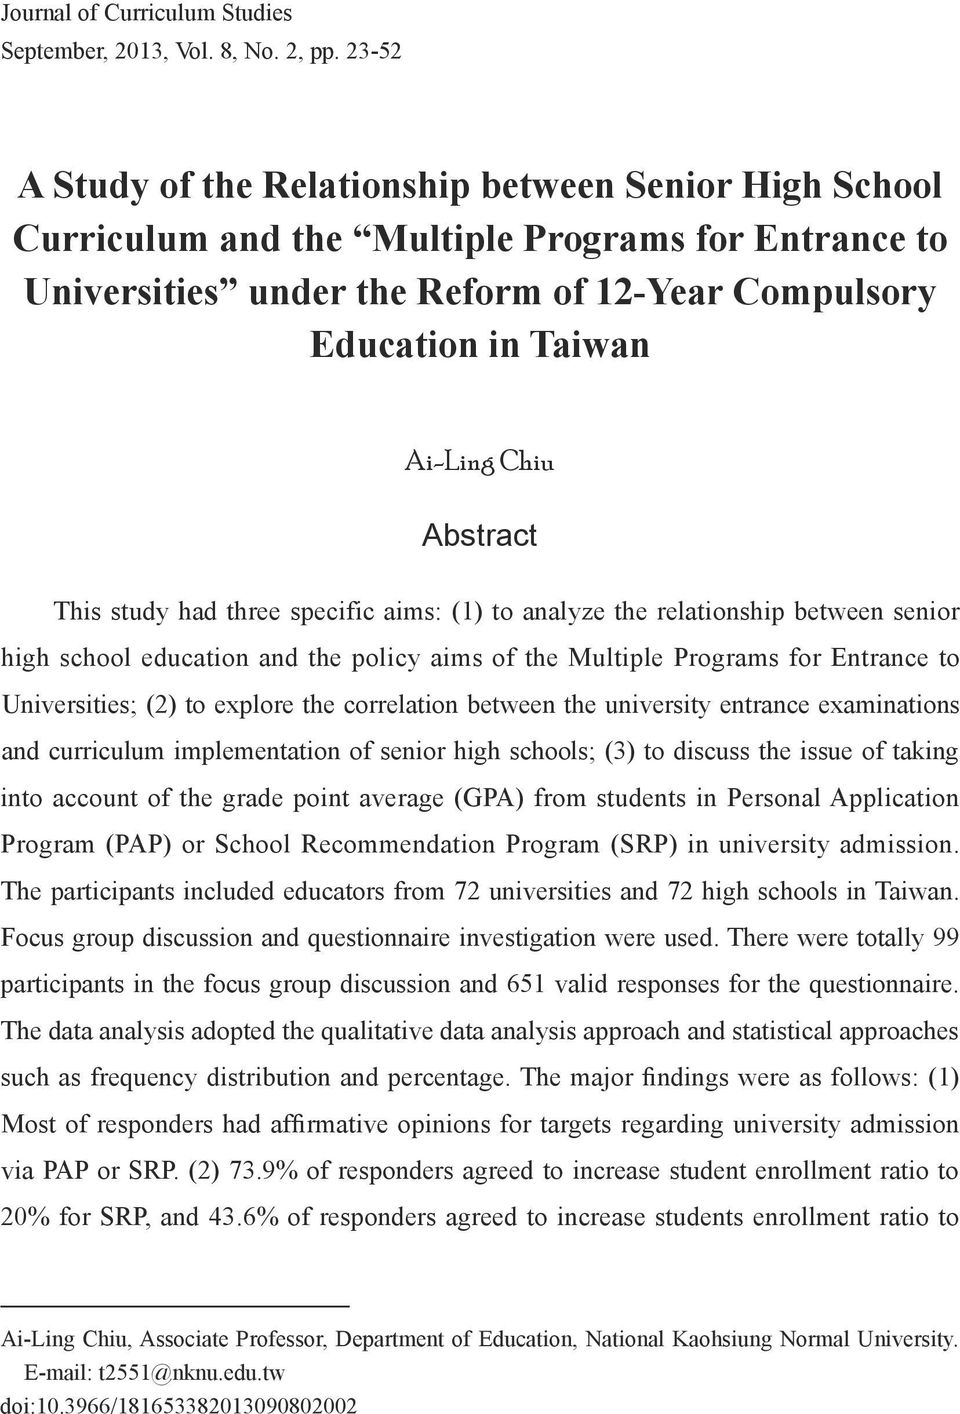 Abstract This study had three specific aims: (1) to analyze the relationship between senior high school education and the policy aims of the Multiple Programs for Entrance to Universities; (2) to